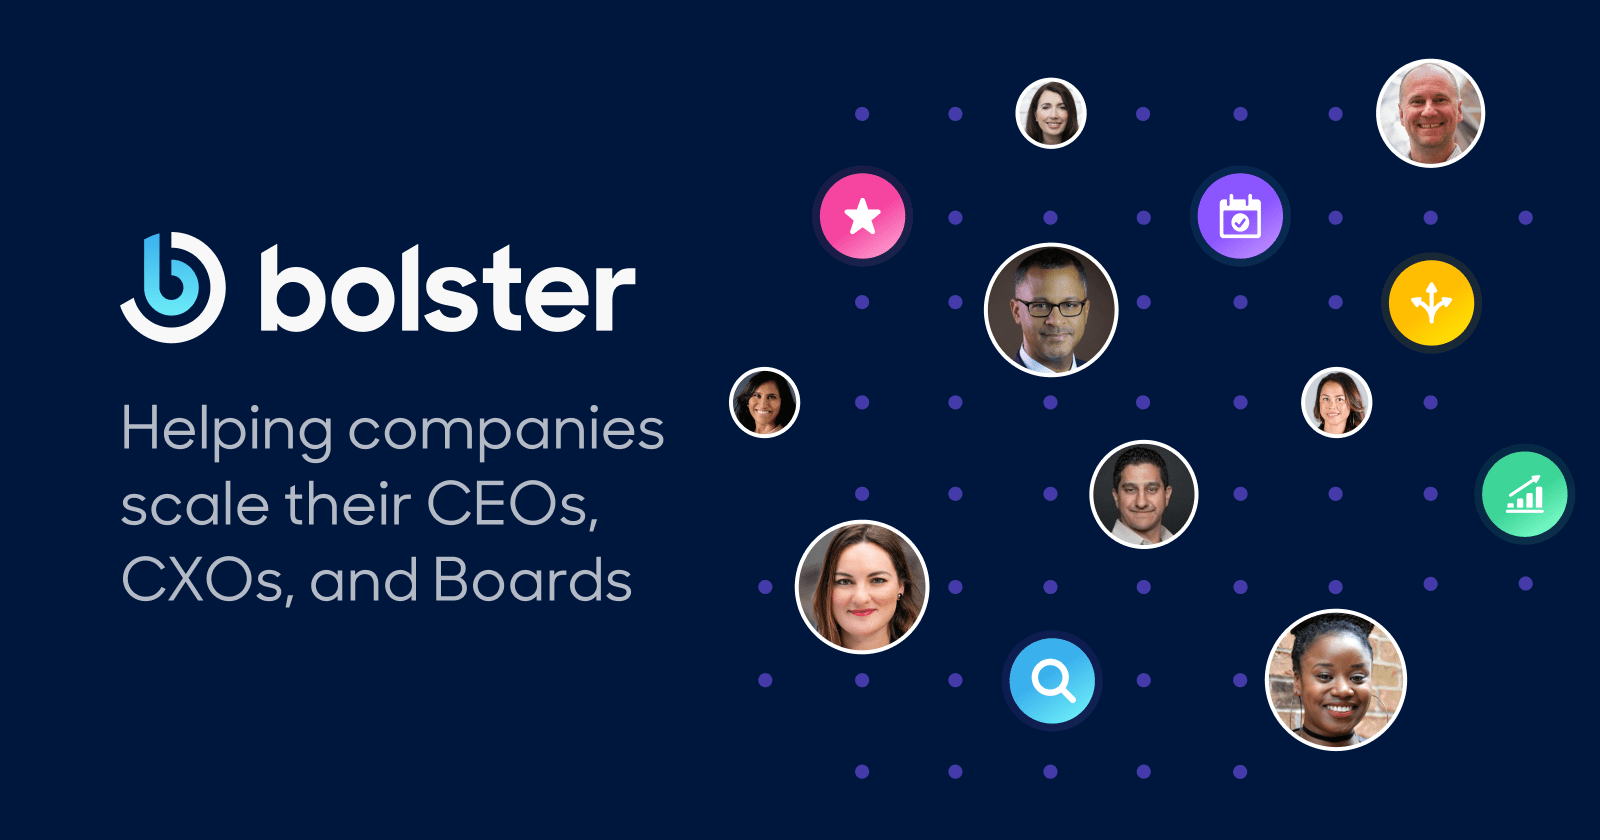 Executive Talent Marketplace Bolster Launches With a New Way to Scale Executive Teams and Boards